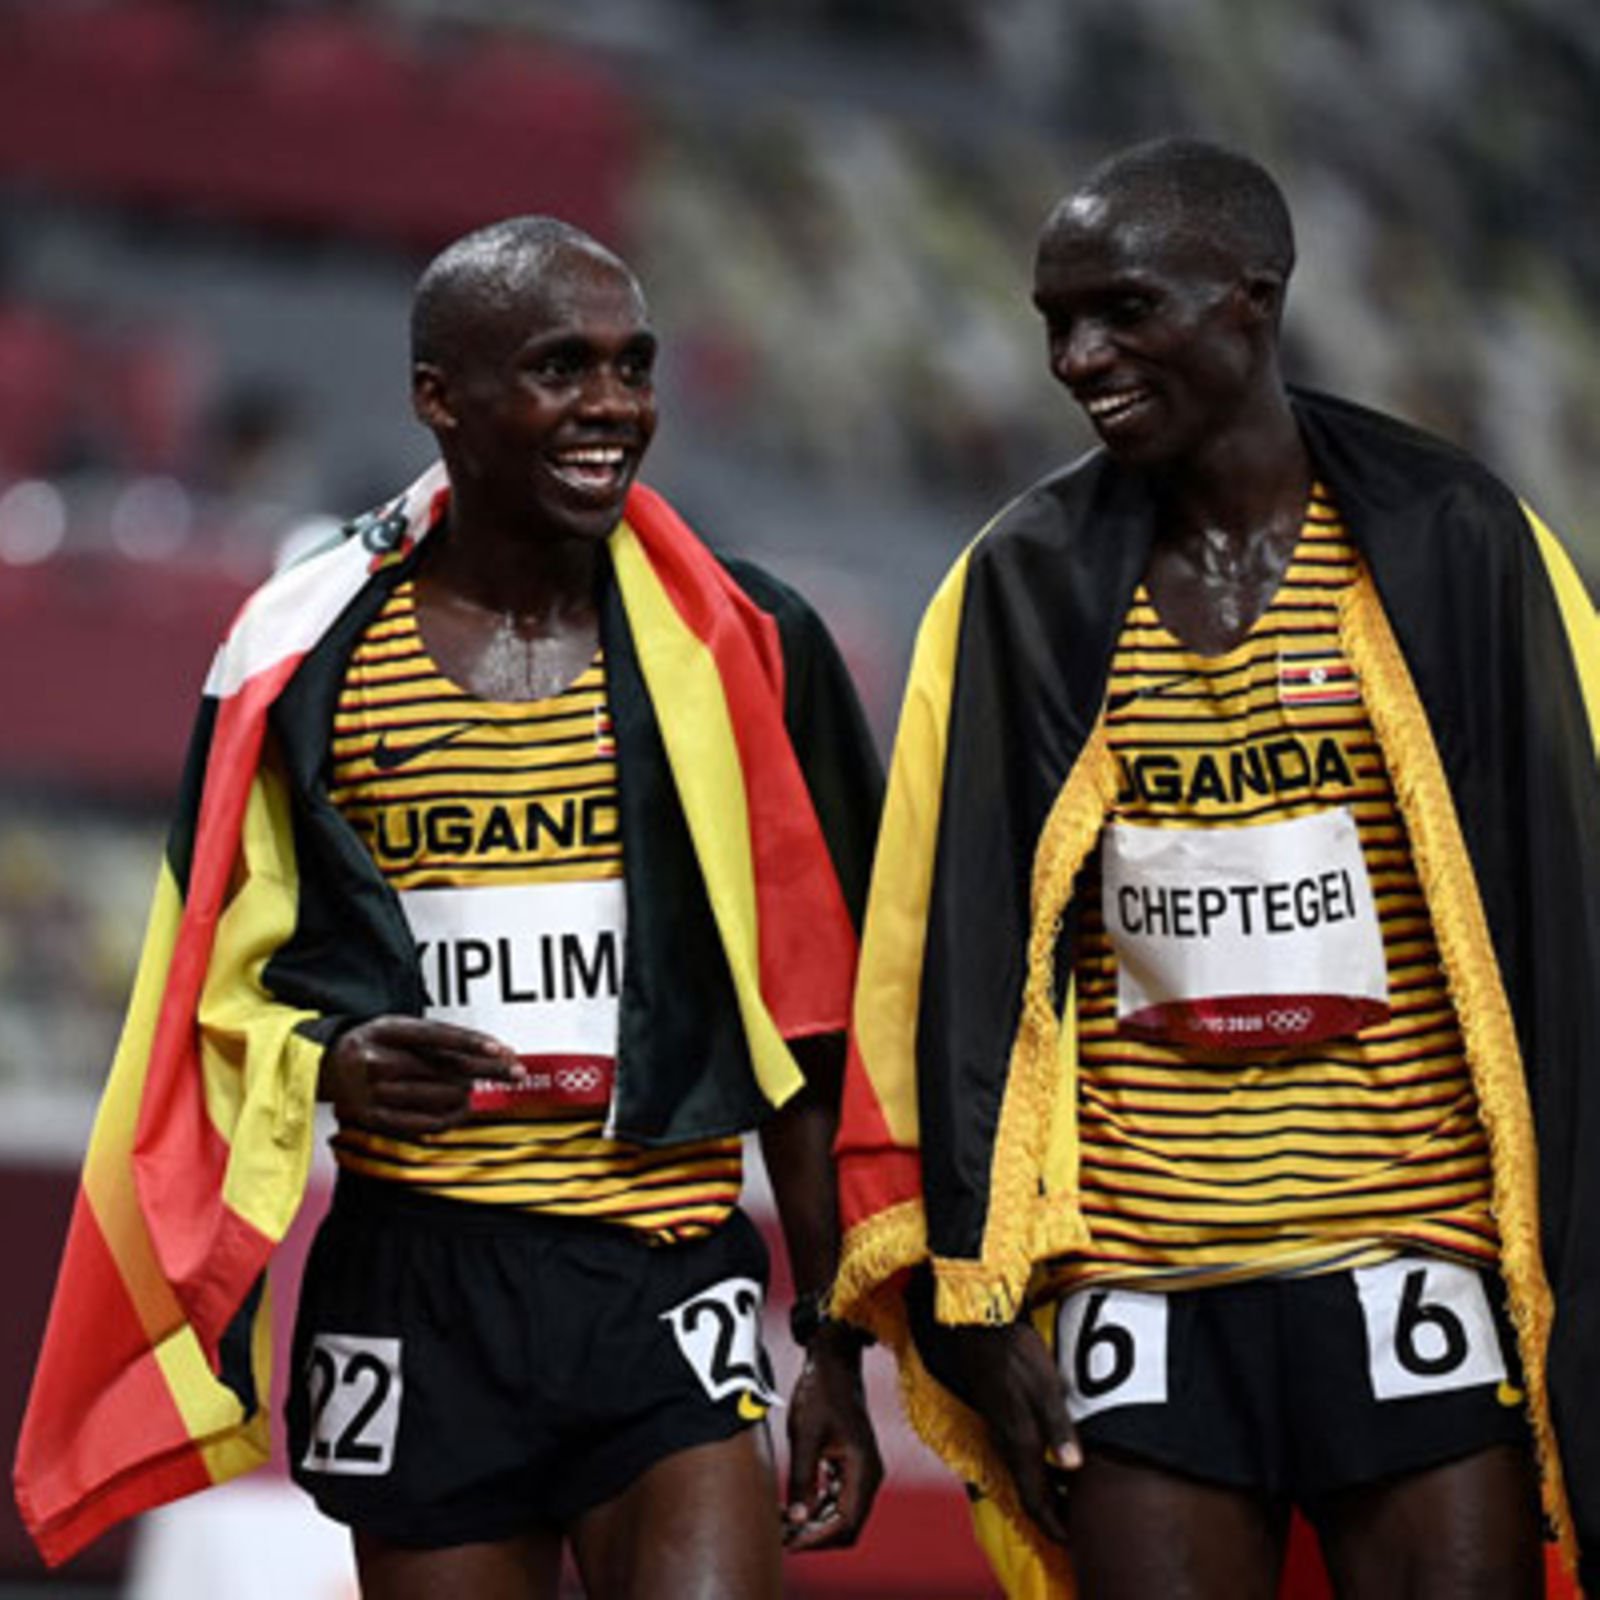 Uganda is yet to unveil athletes kits for Africa games